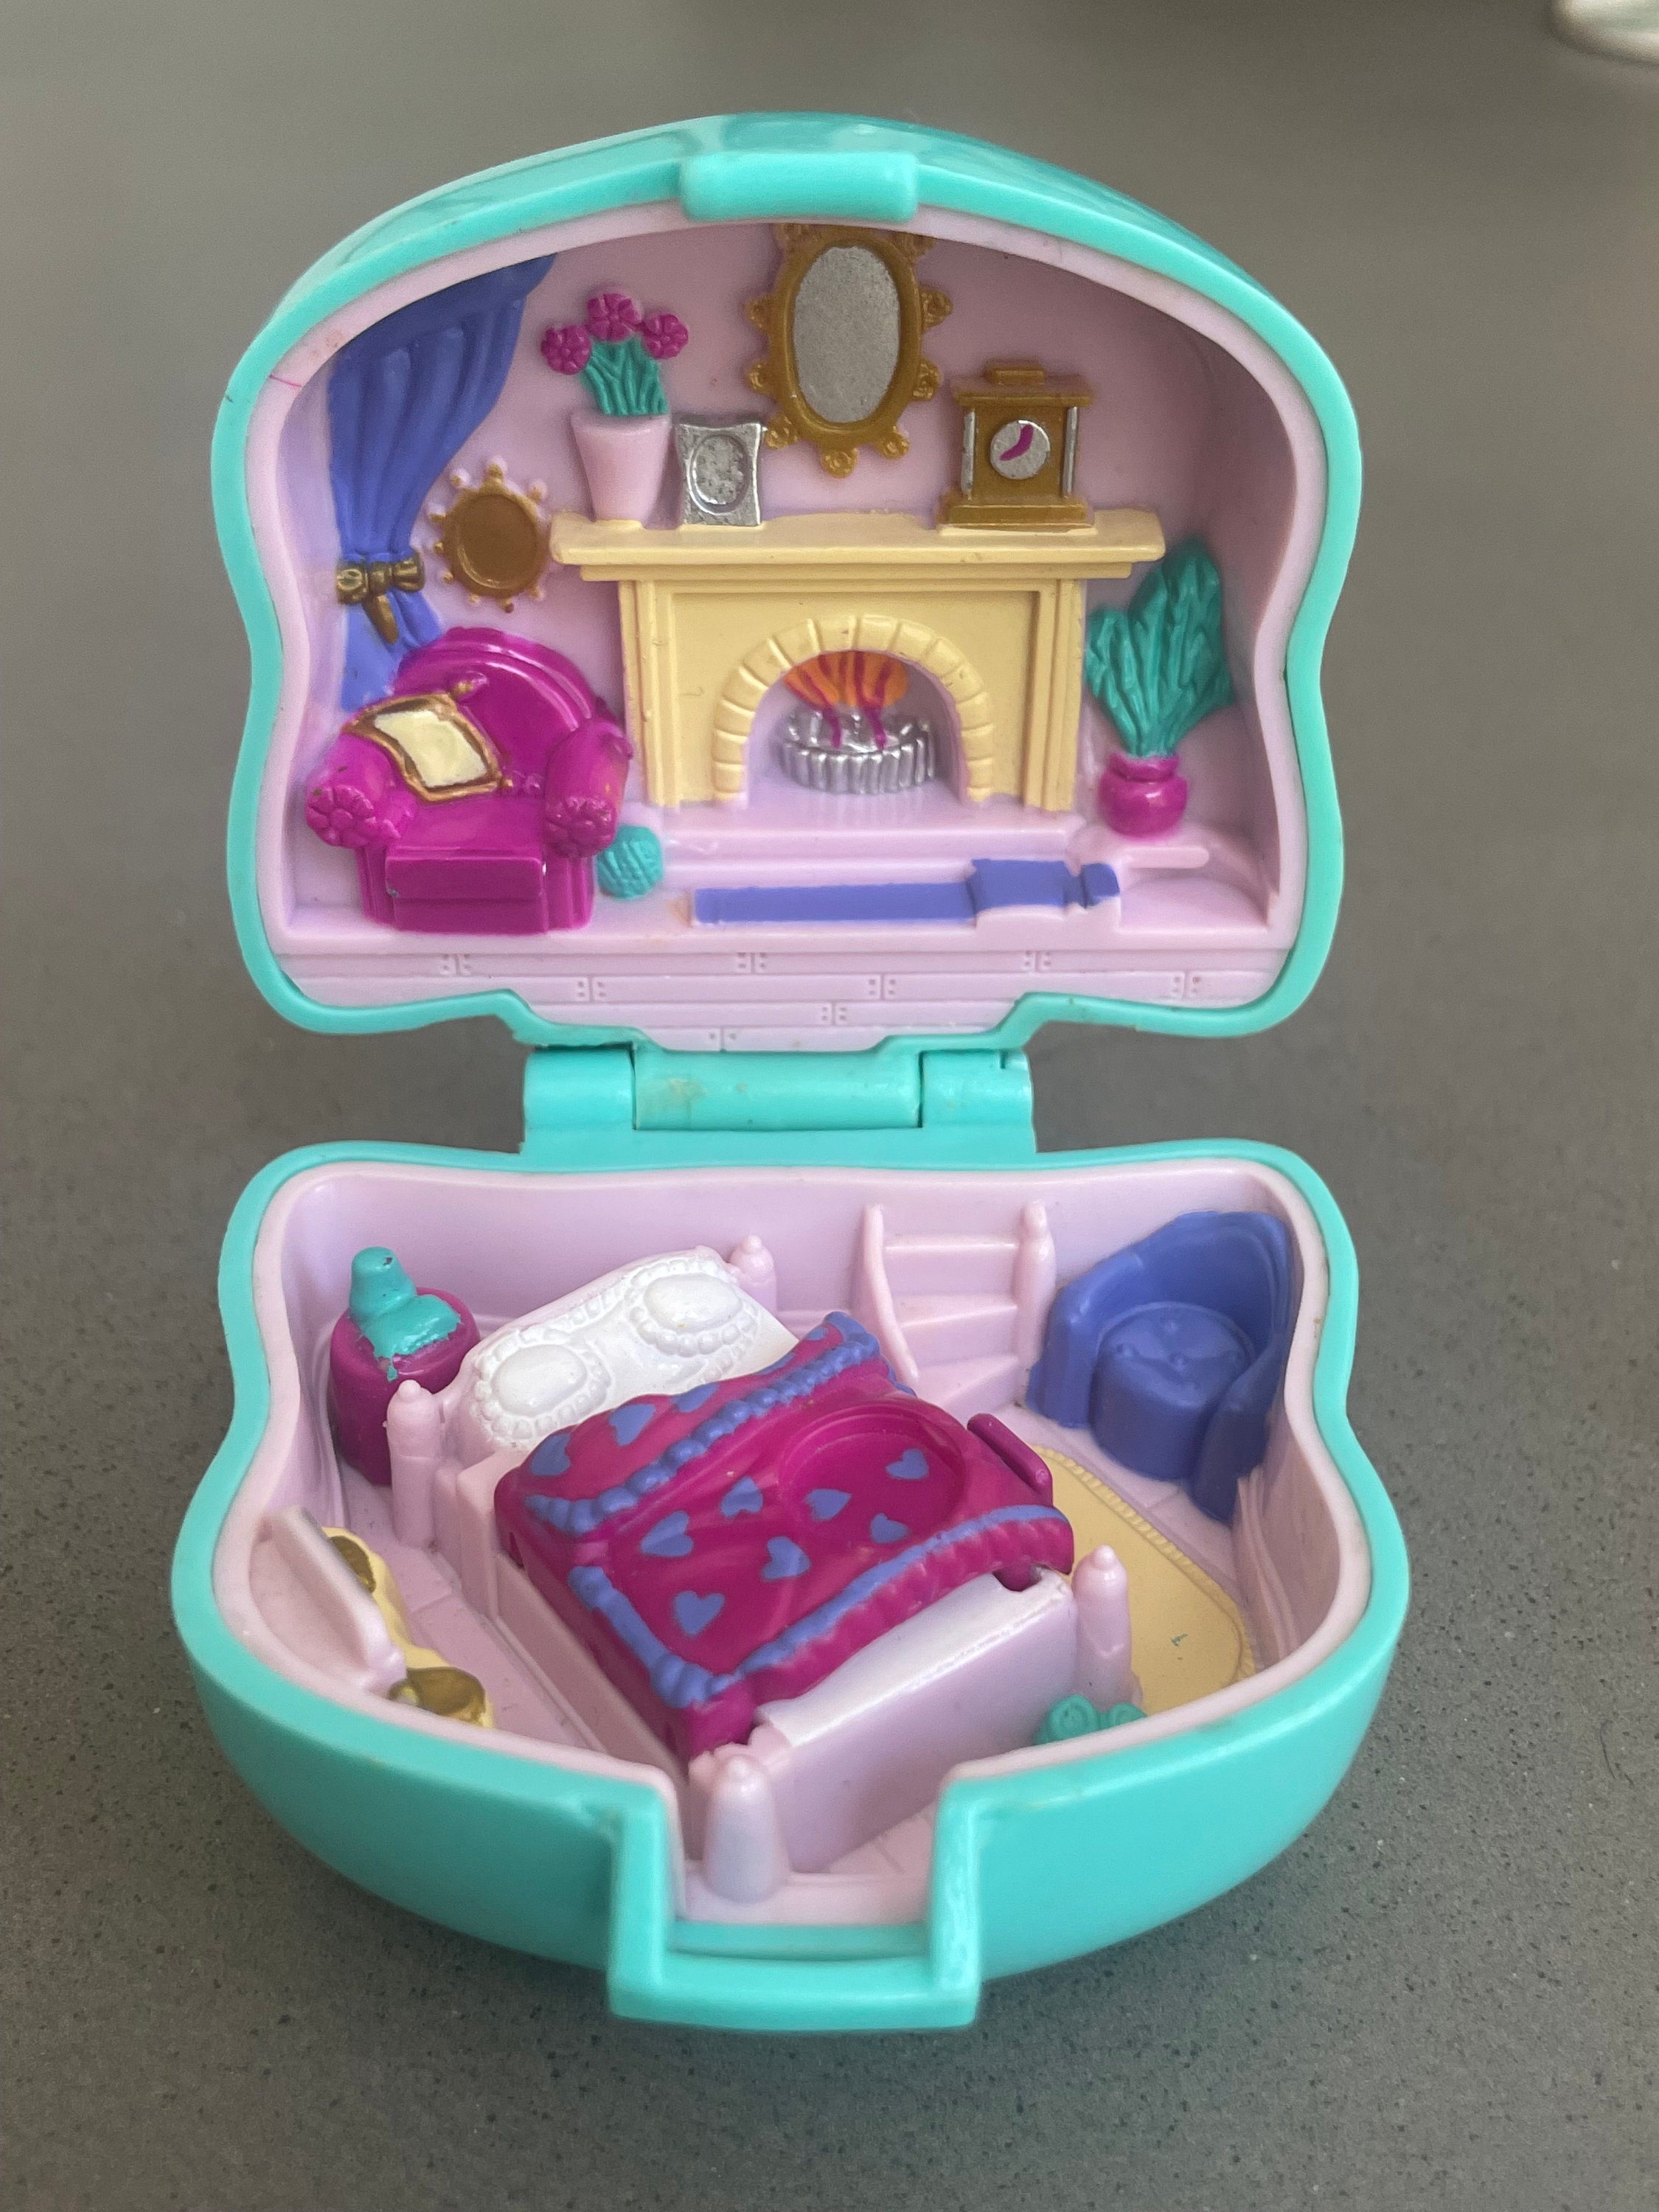 Cuddly Kitty Pet Parade, Polly Pocket, Complete, Variation, 1993 